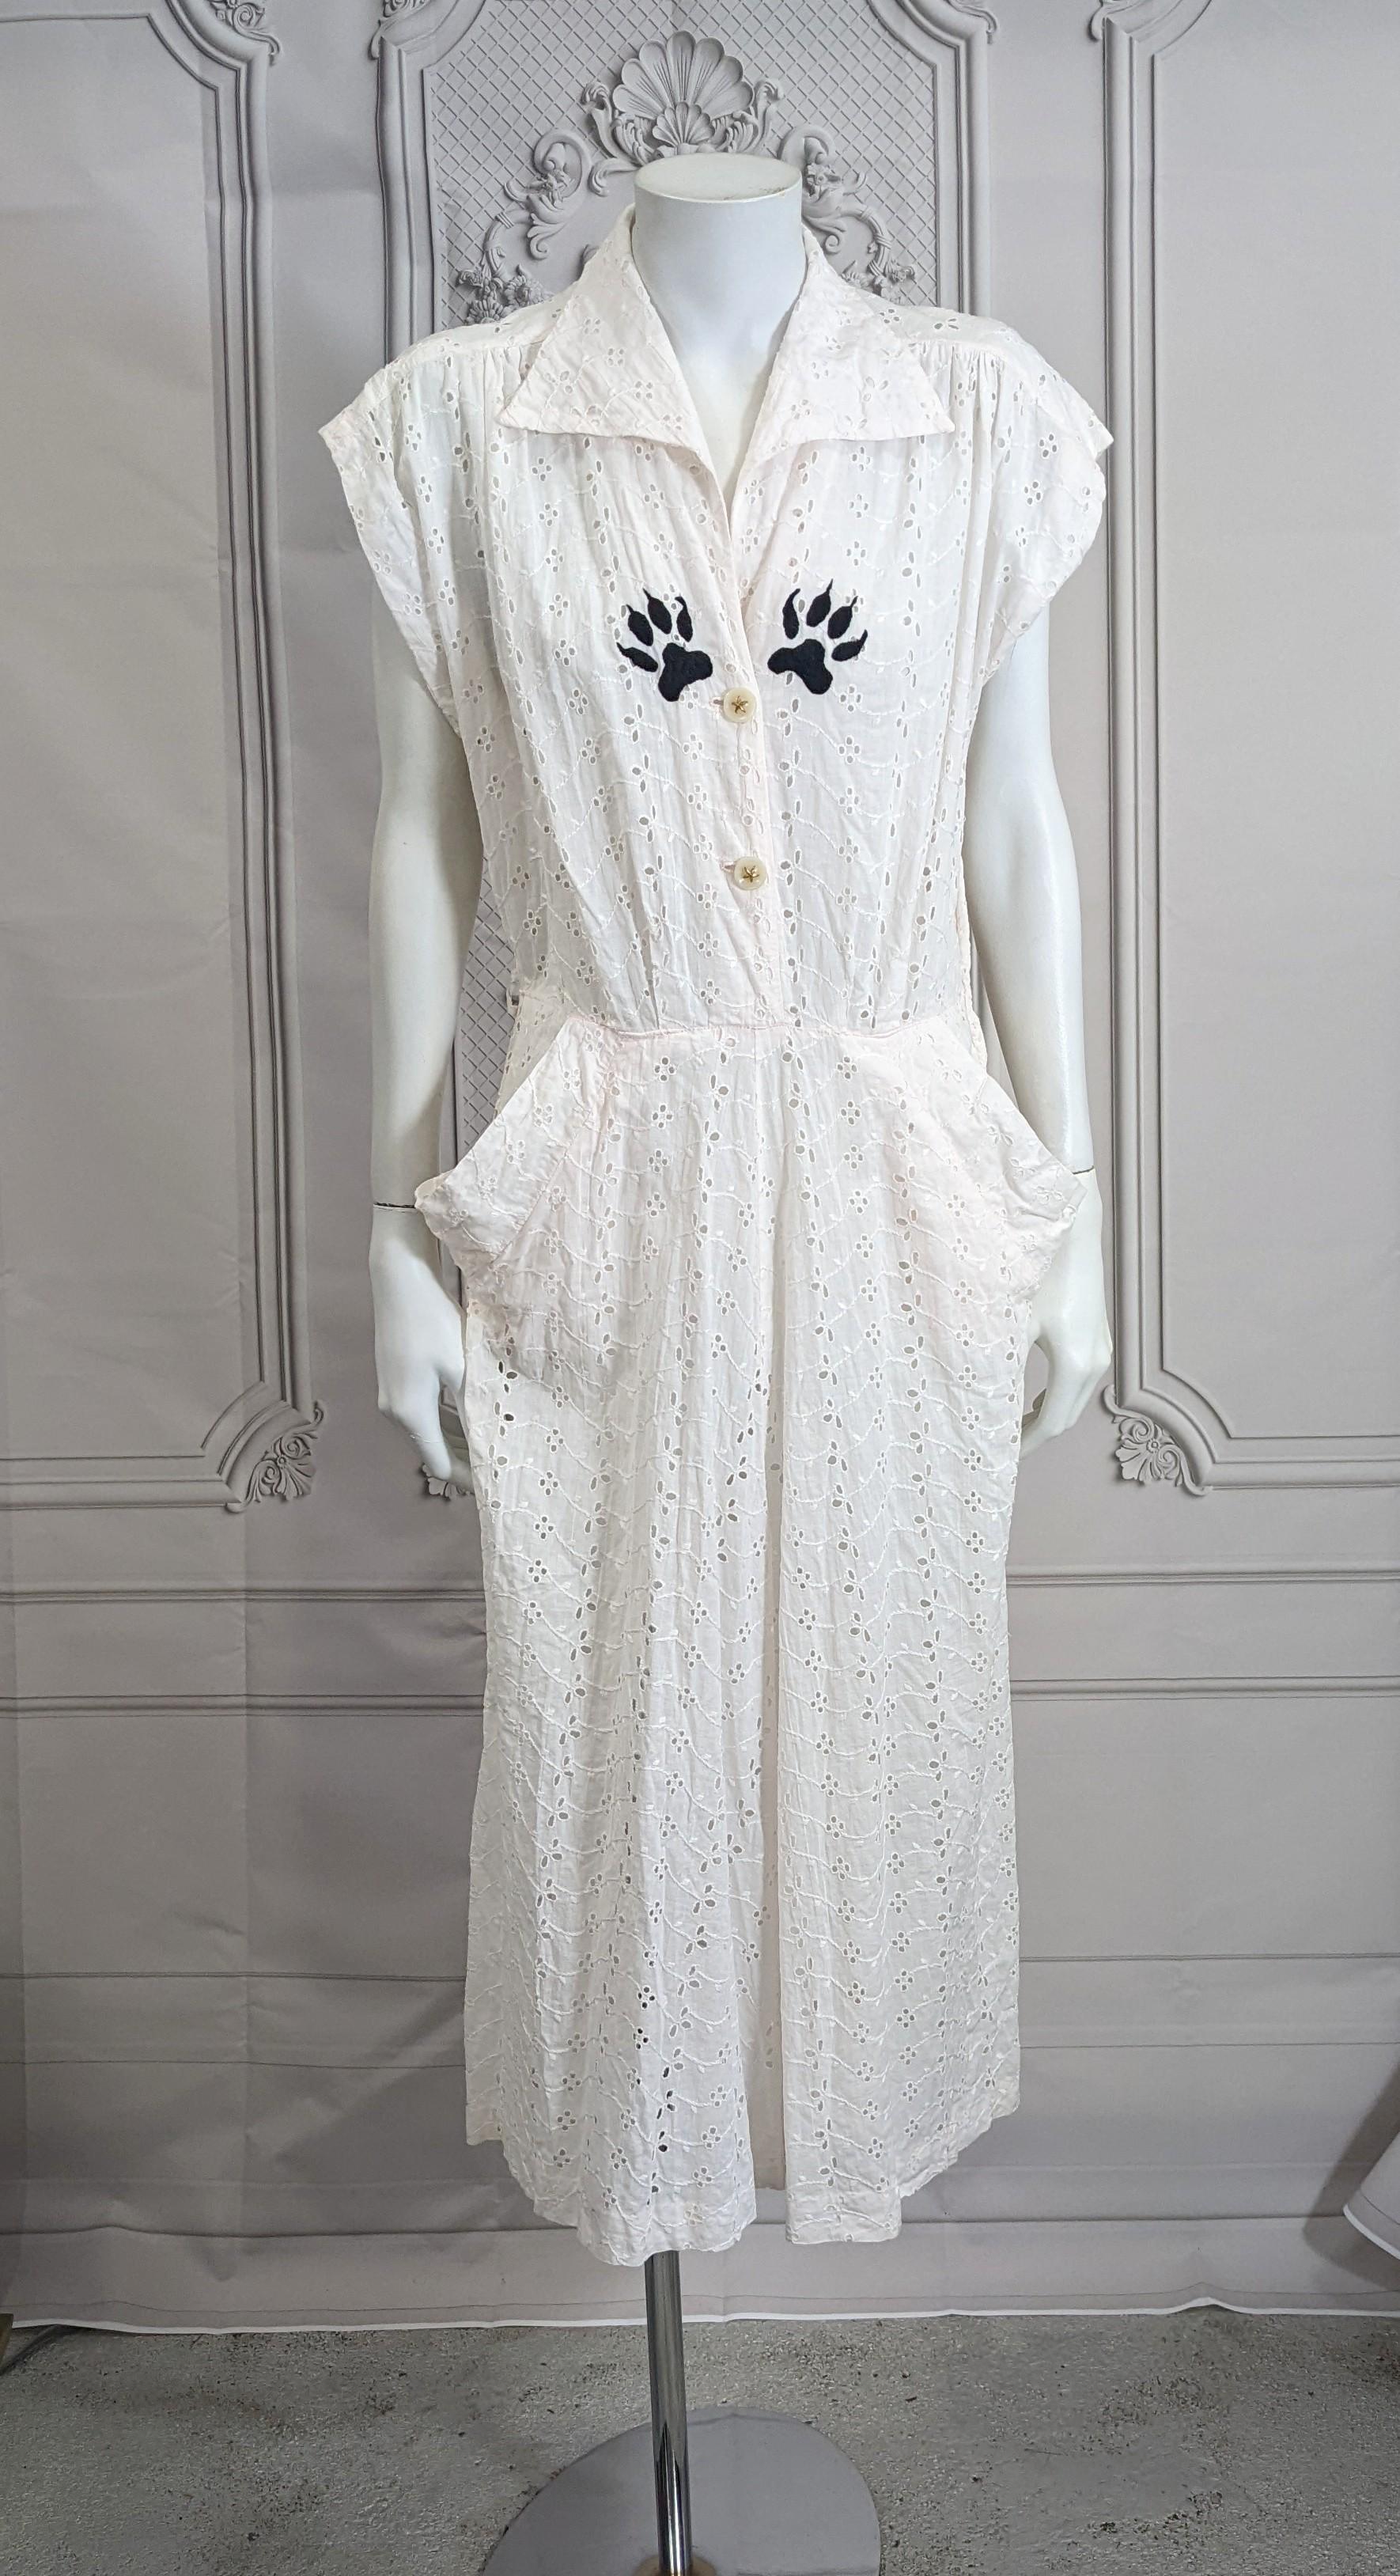 Upcycled Eyelet Dress with Hand Embroidery, Studio VL. Easy 1950's cotton eyelet shirt waist dress with front buttons and side zipper with a slightly pink tint. 
We have embroidered 2 naughty cat paws on the chest in black, based off rapper Eves'